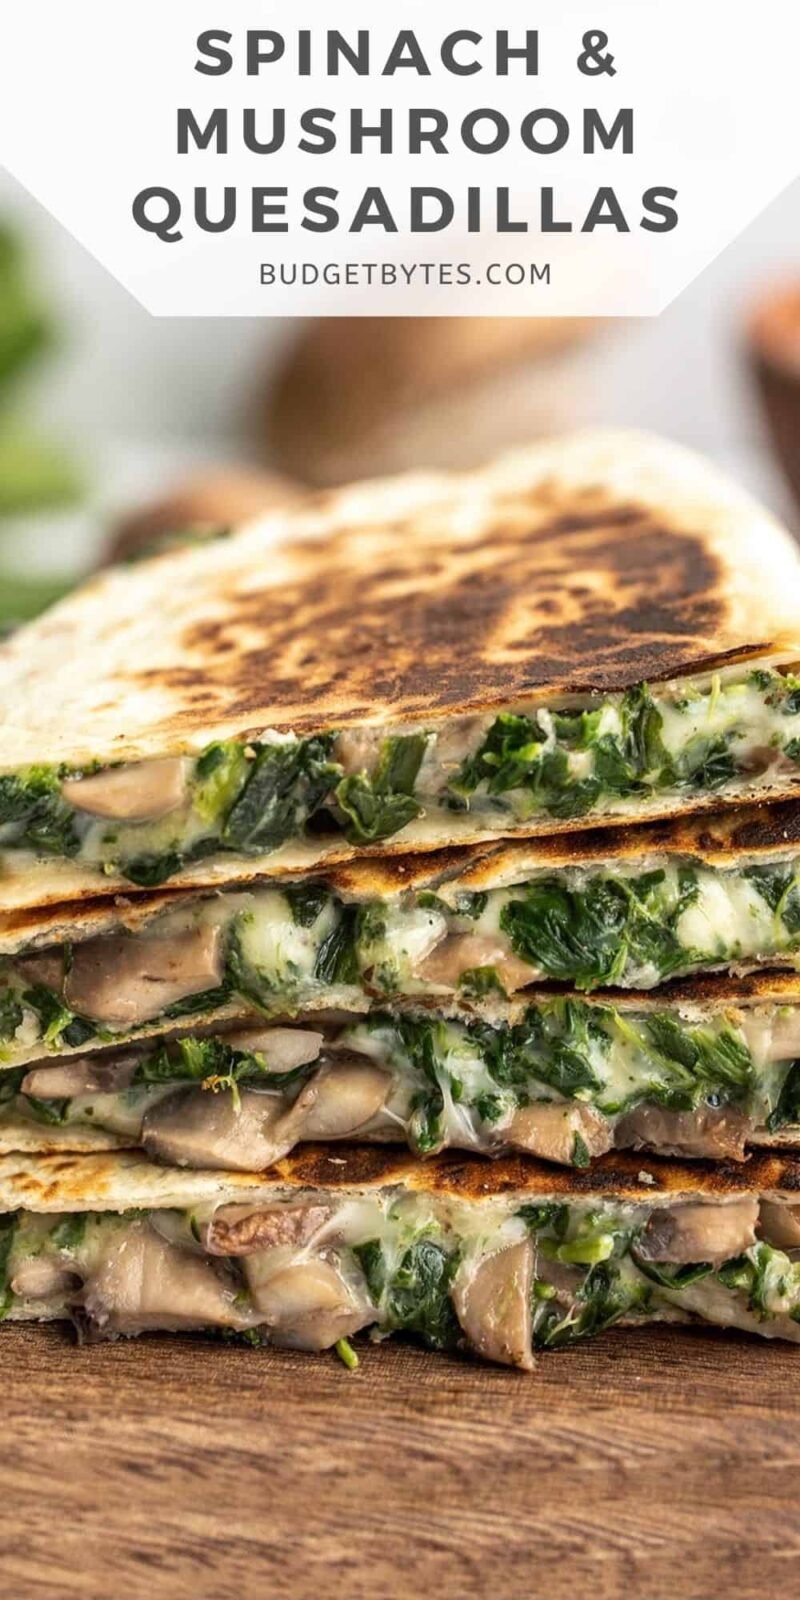 A stack of spinach and mushroom Quesadillas, title text at the top